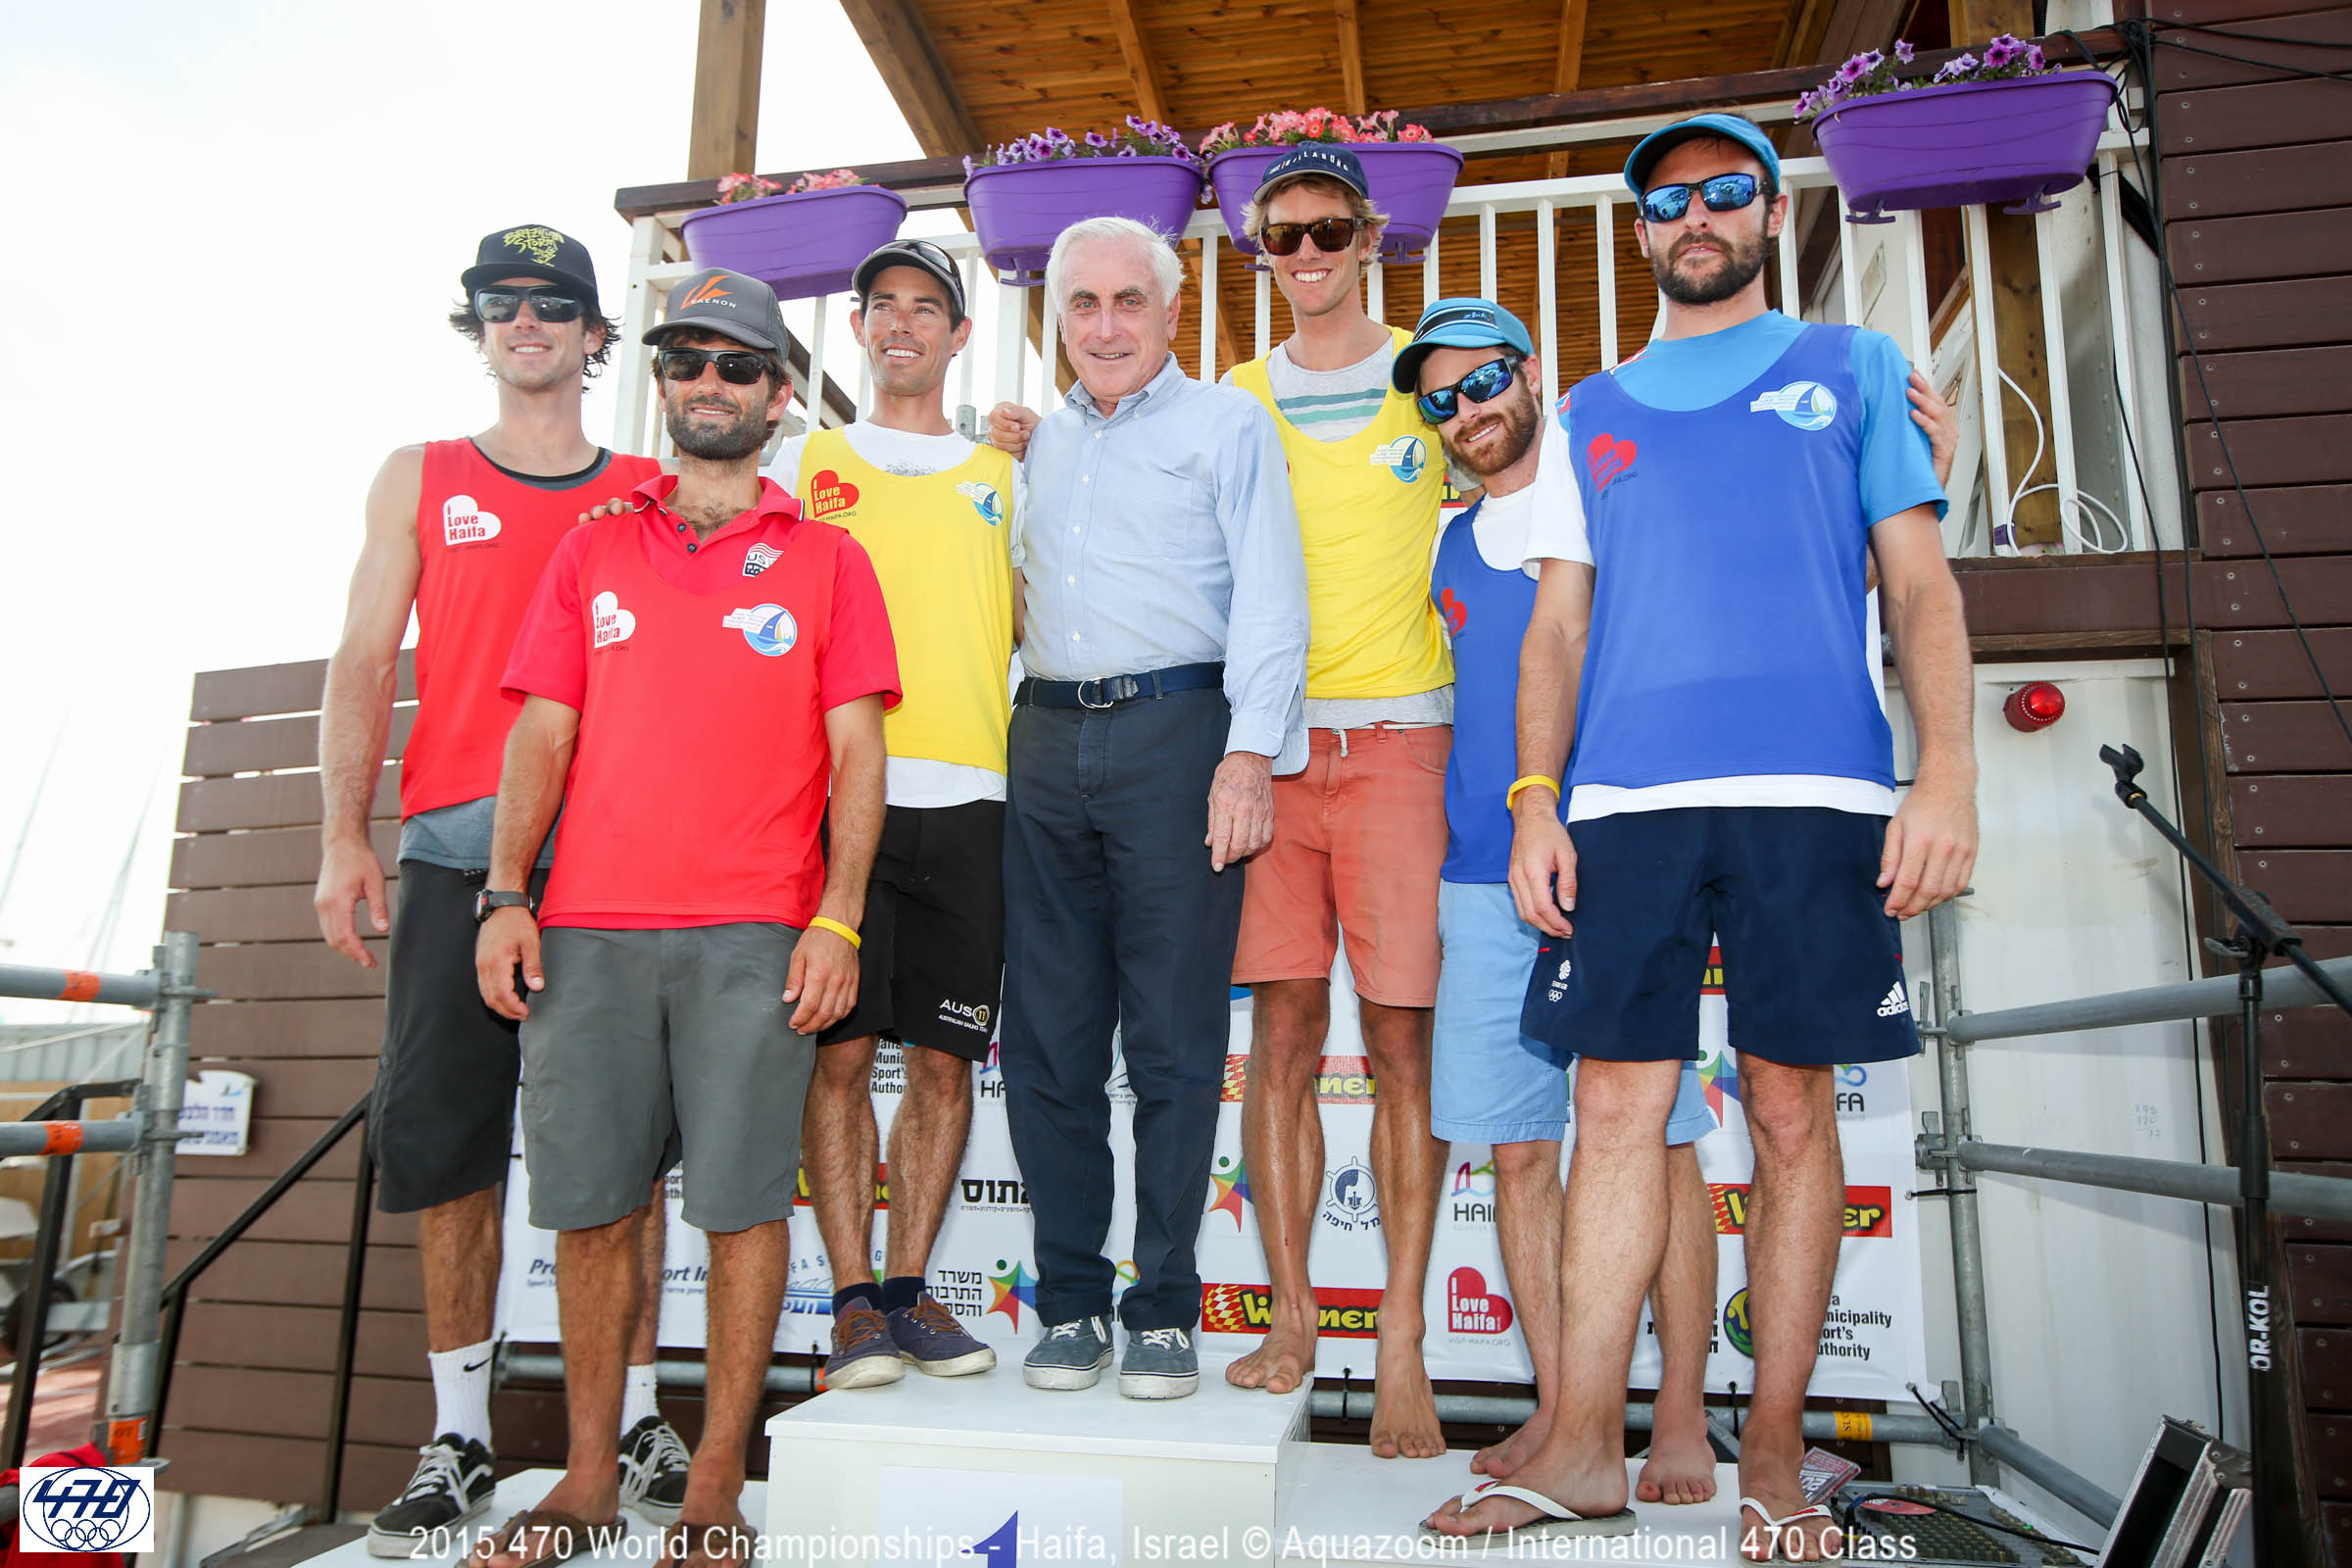 ISAF President Carlo Croce presents leader bibs to the 470 Men